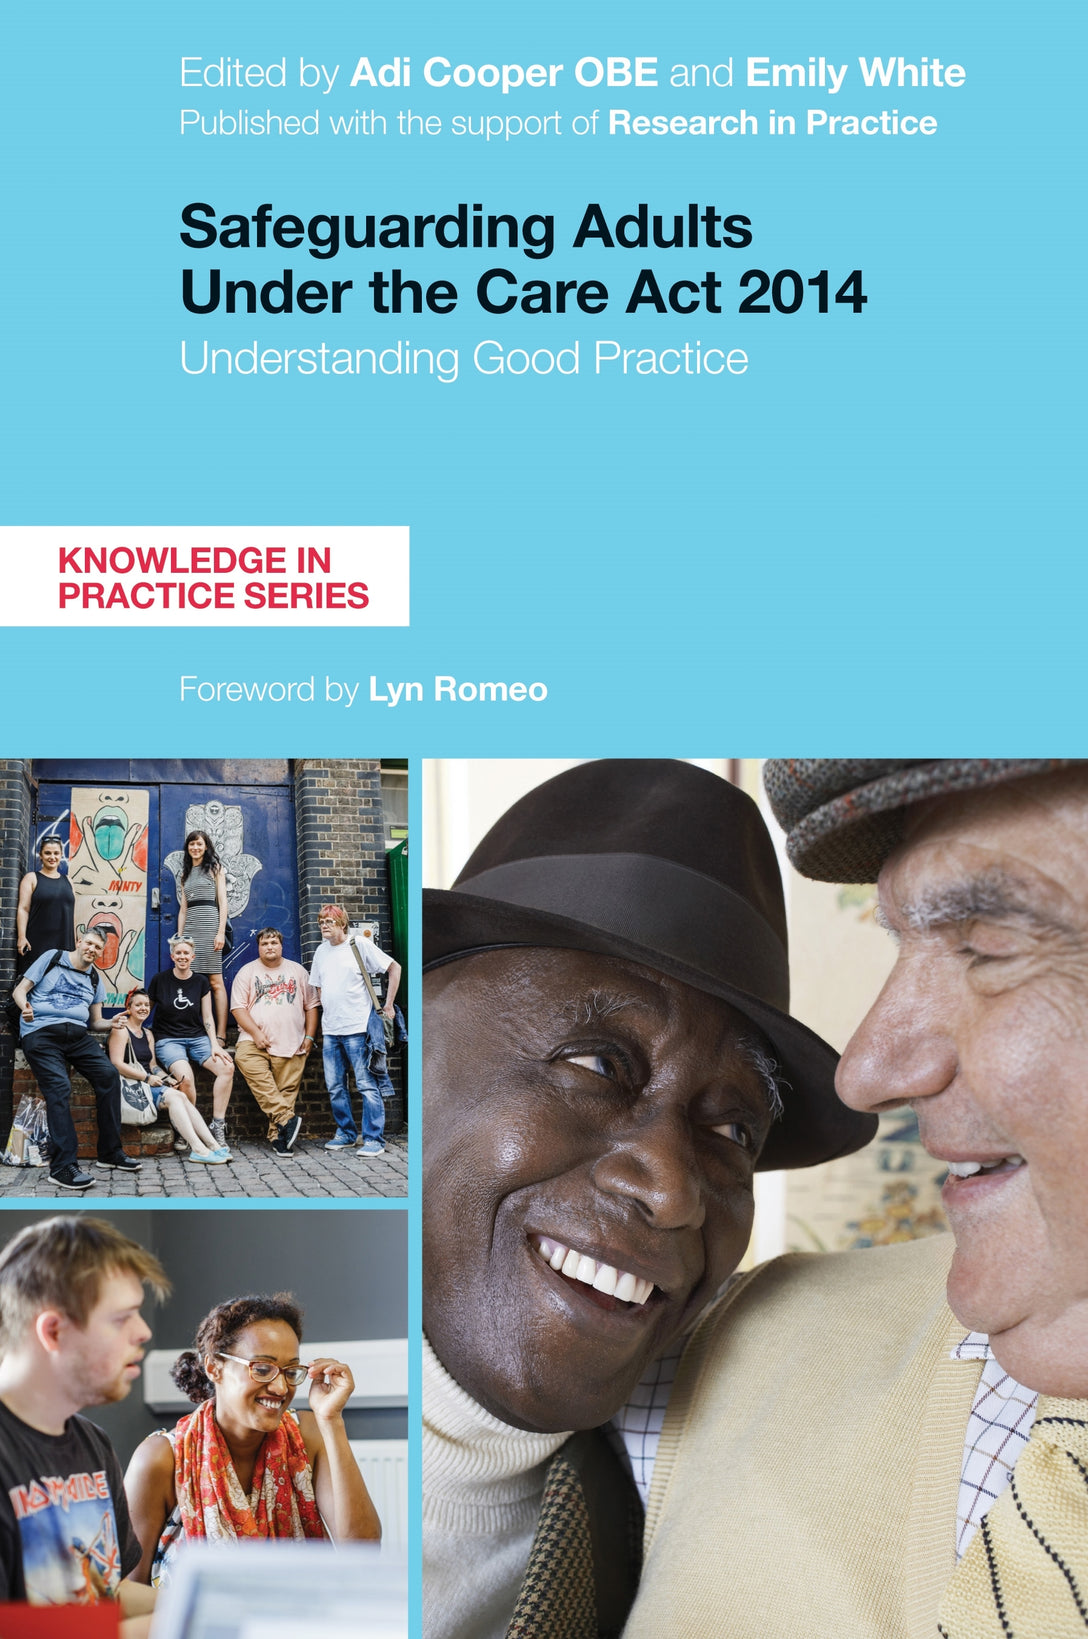 Safeguarding Adults Under the Care Act 2014 by Adi Cooper, Emily White, Lyn Romeo